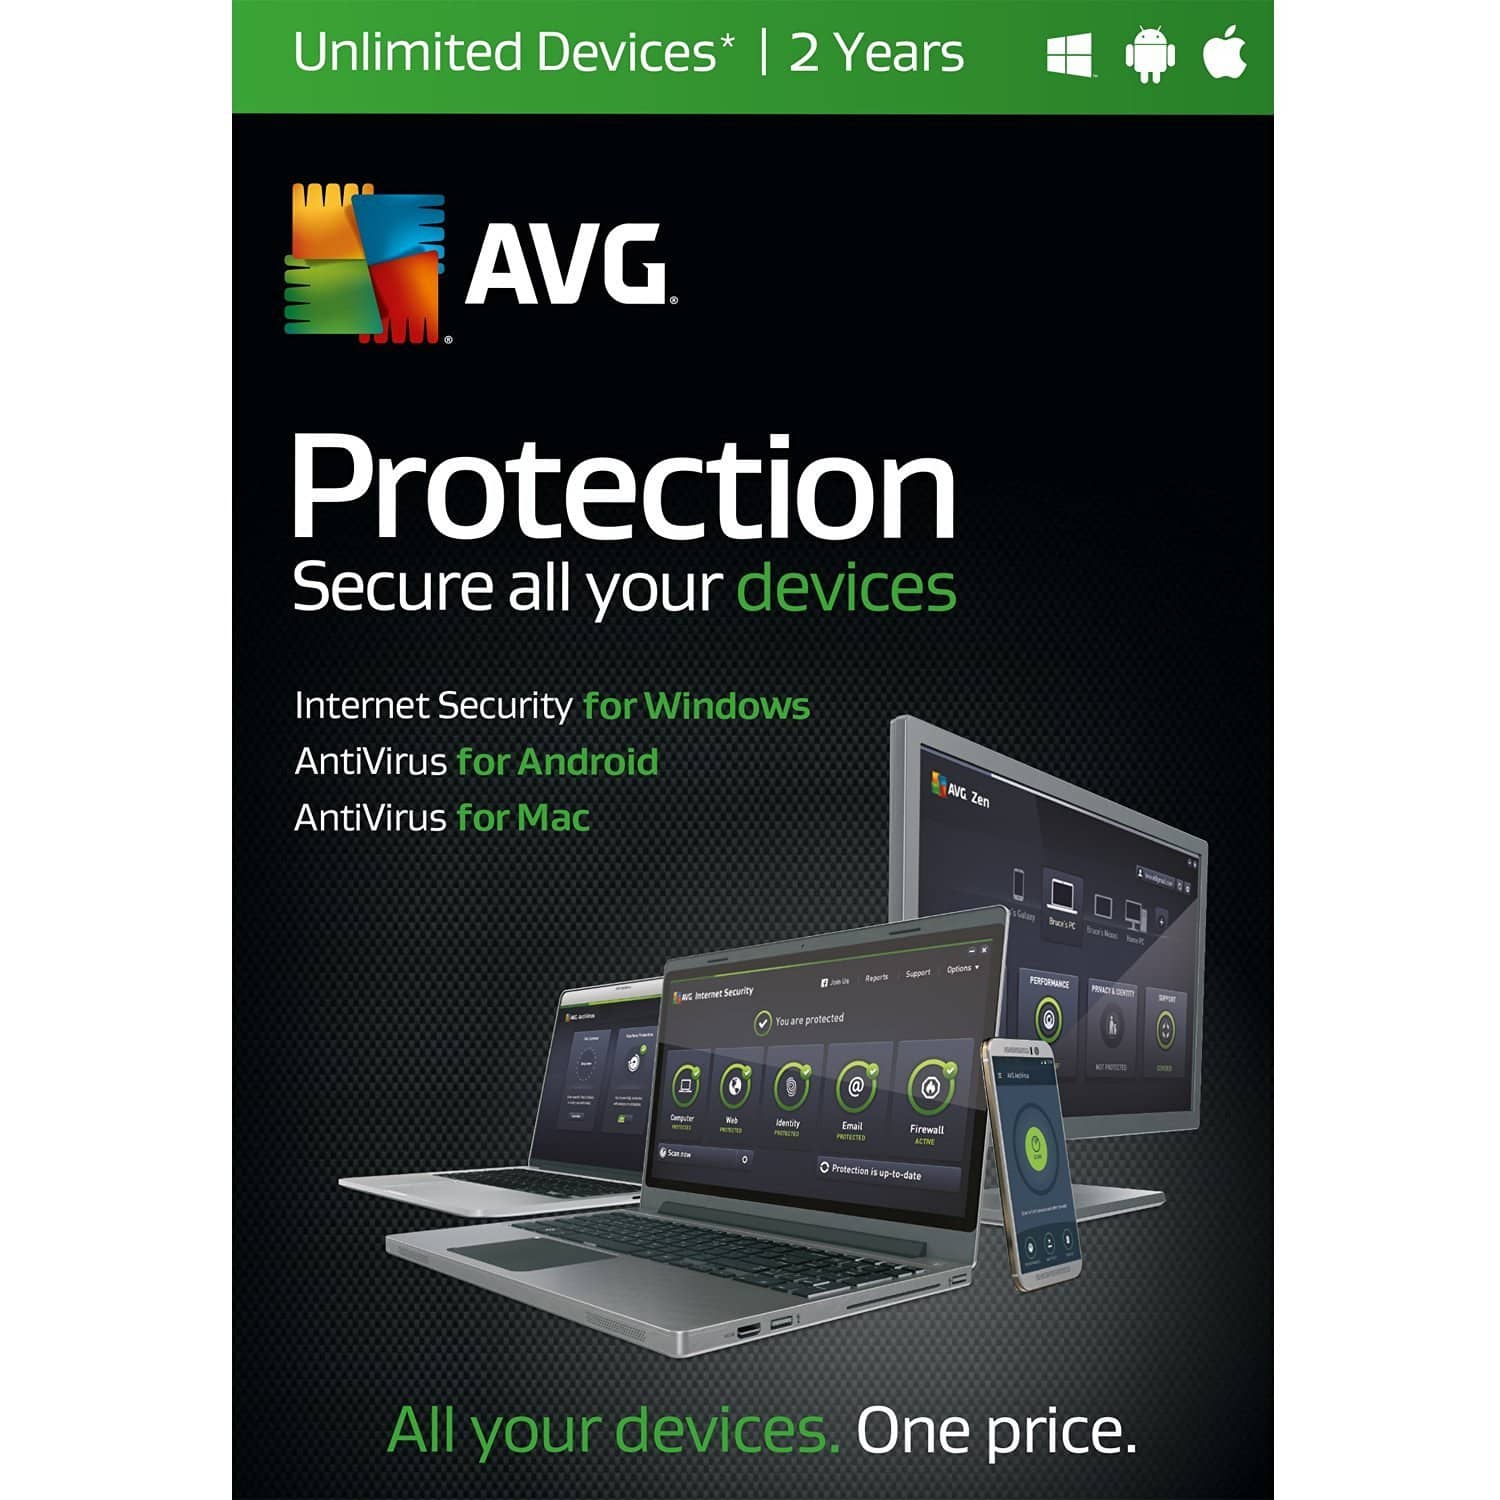 AVG Protection | Unlimited Devices| 2 Years